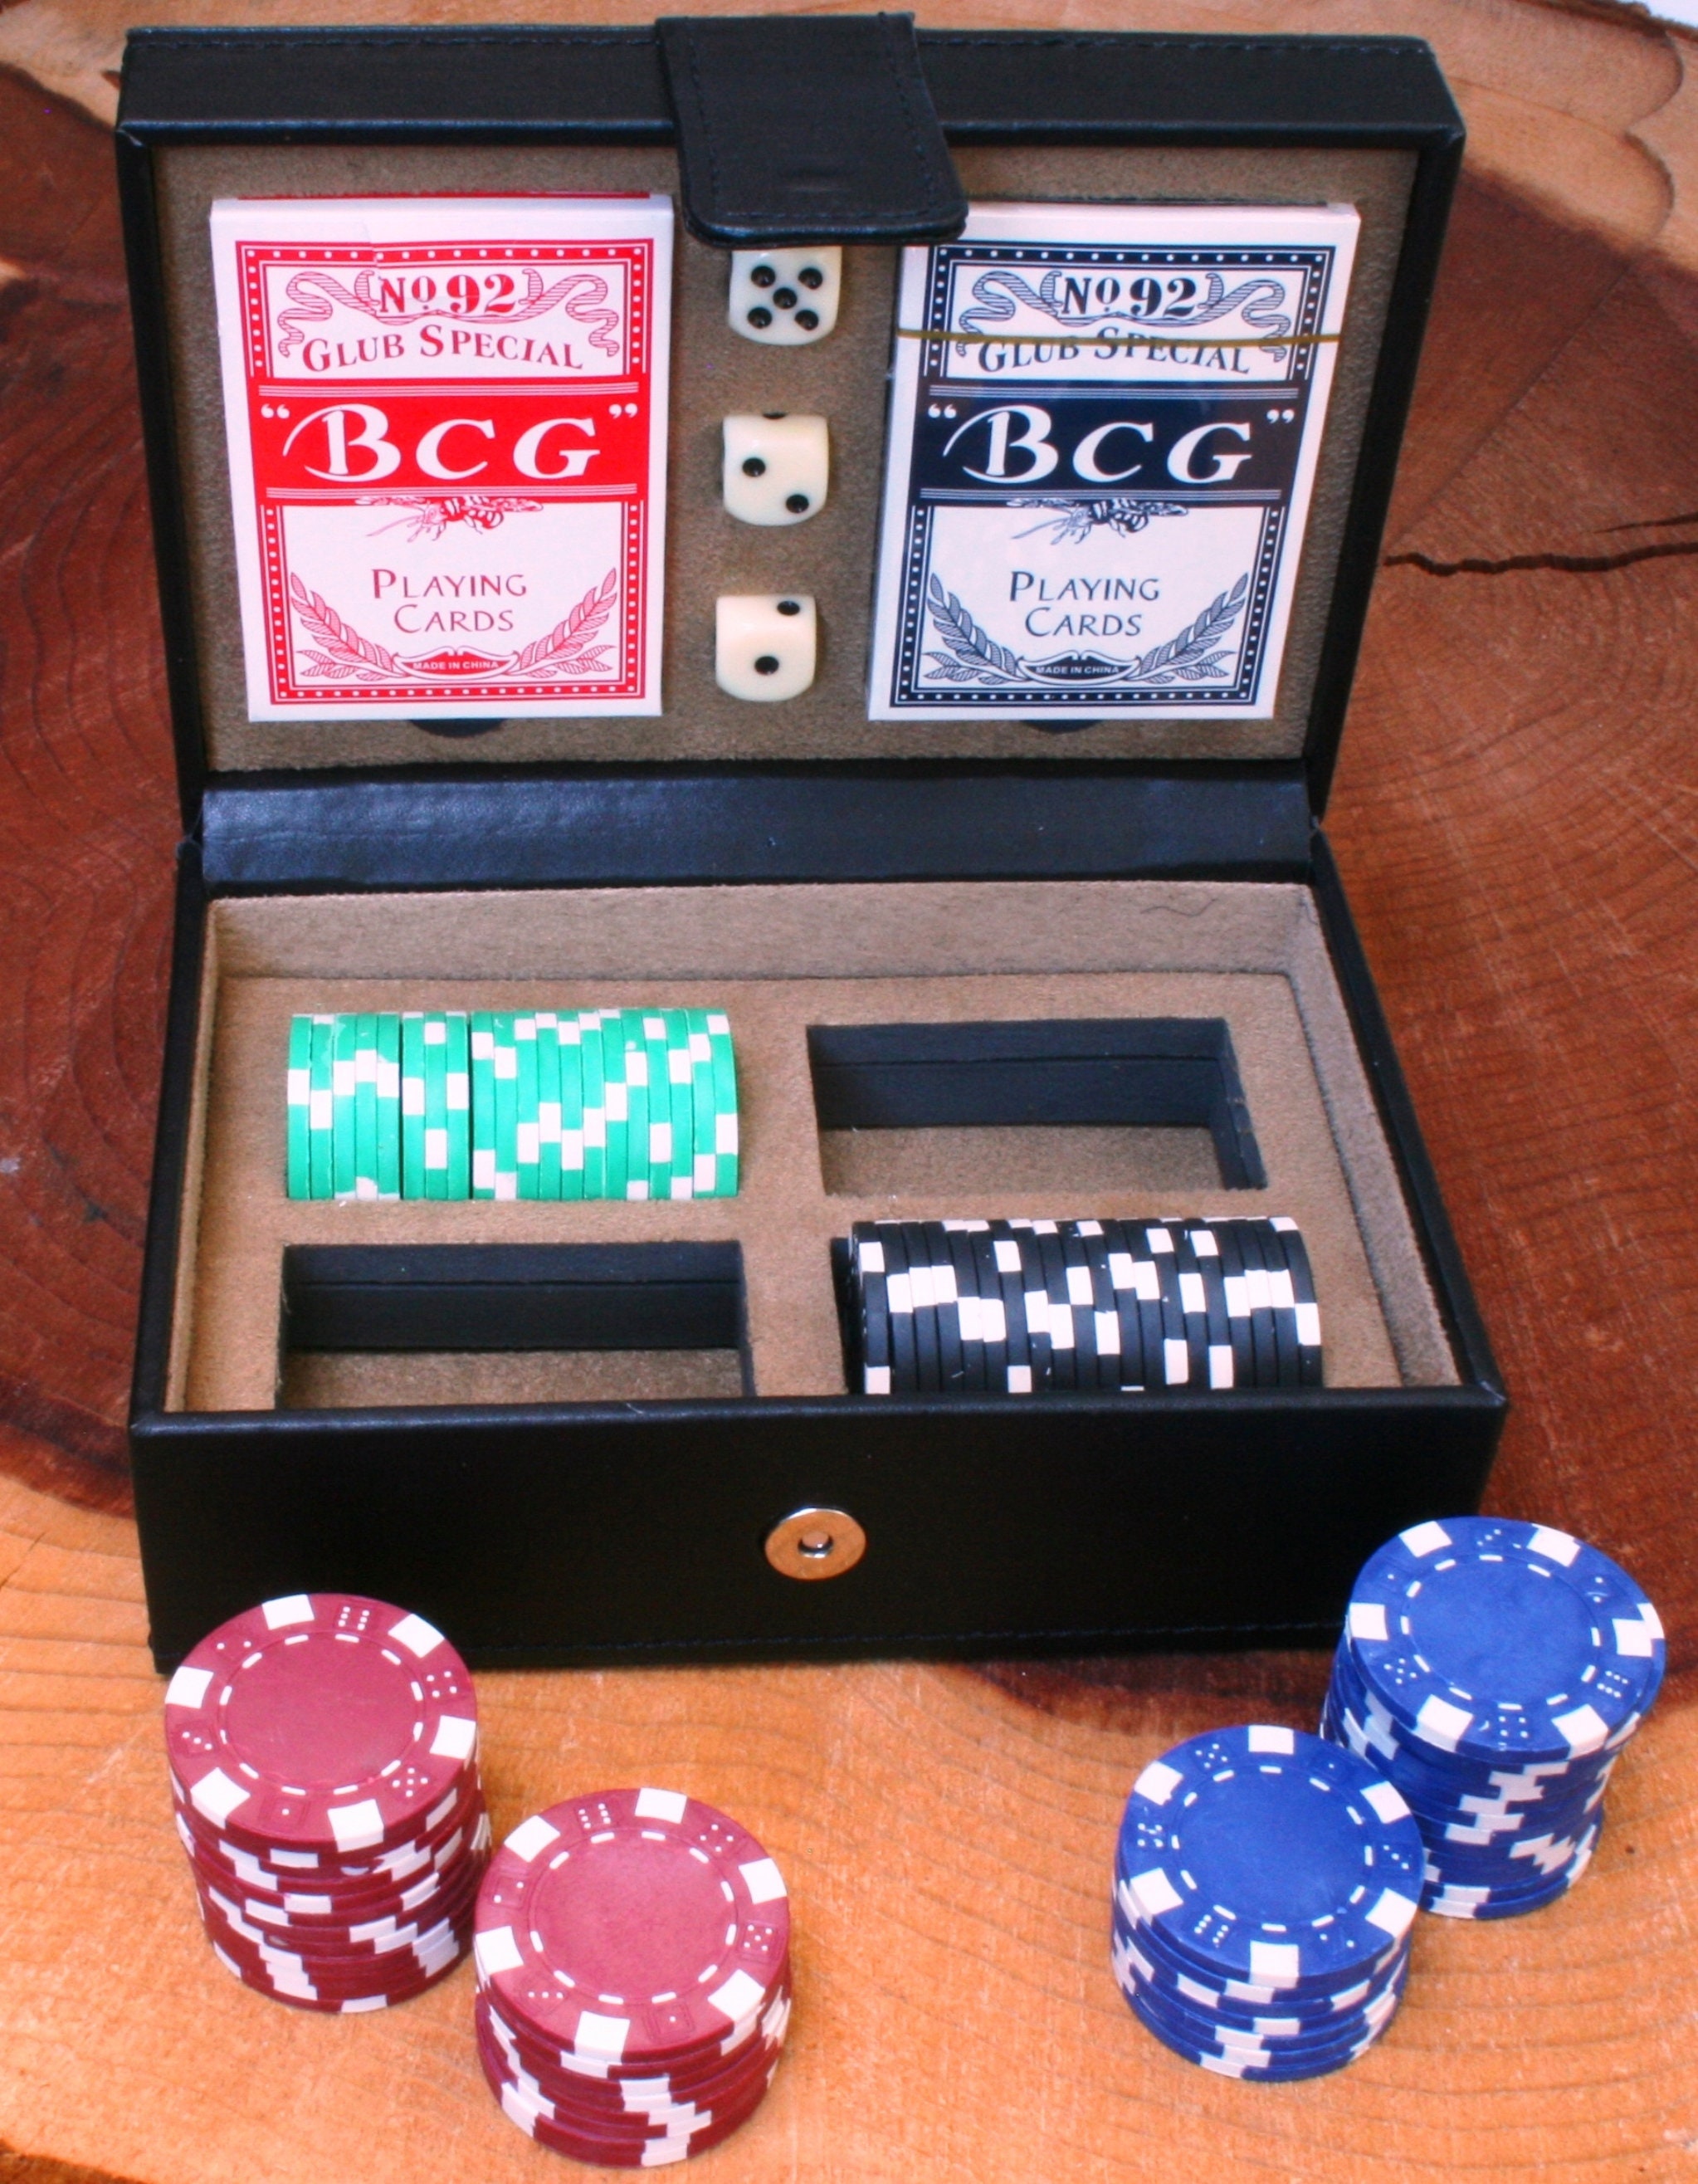 Quality Poker Gaming Set in Case Playing Cards Dice Chips New Horse Racing 